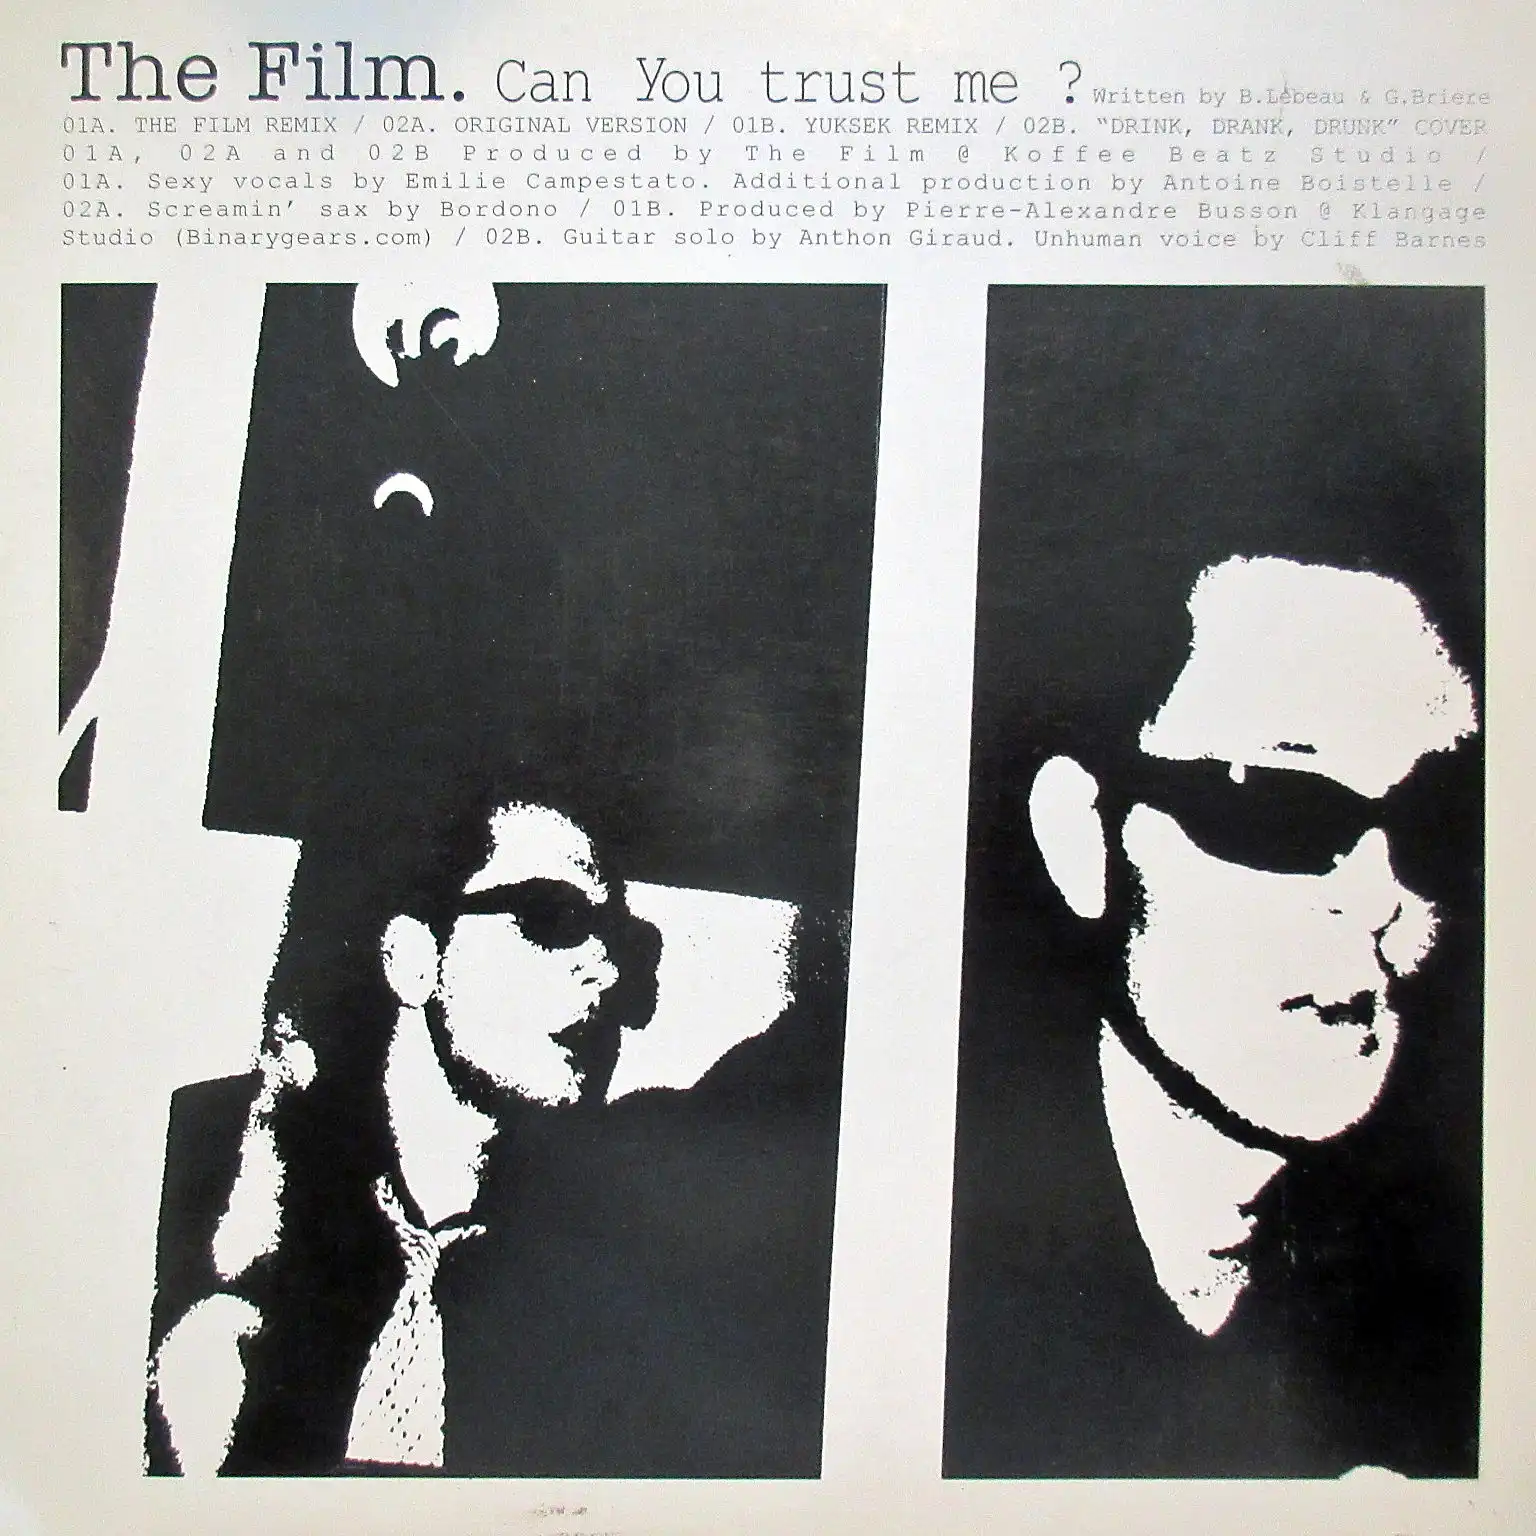 FILM / CAN YOU TRUST ME?